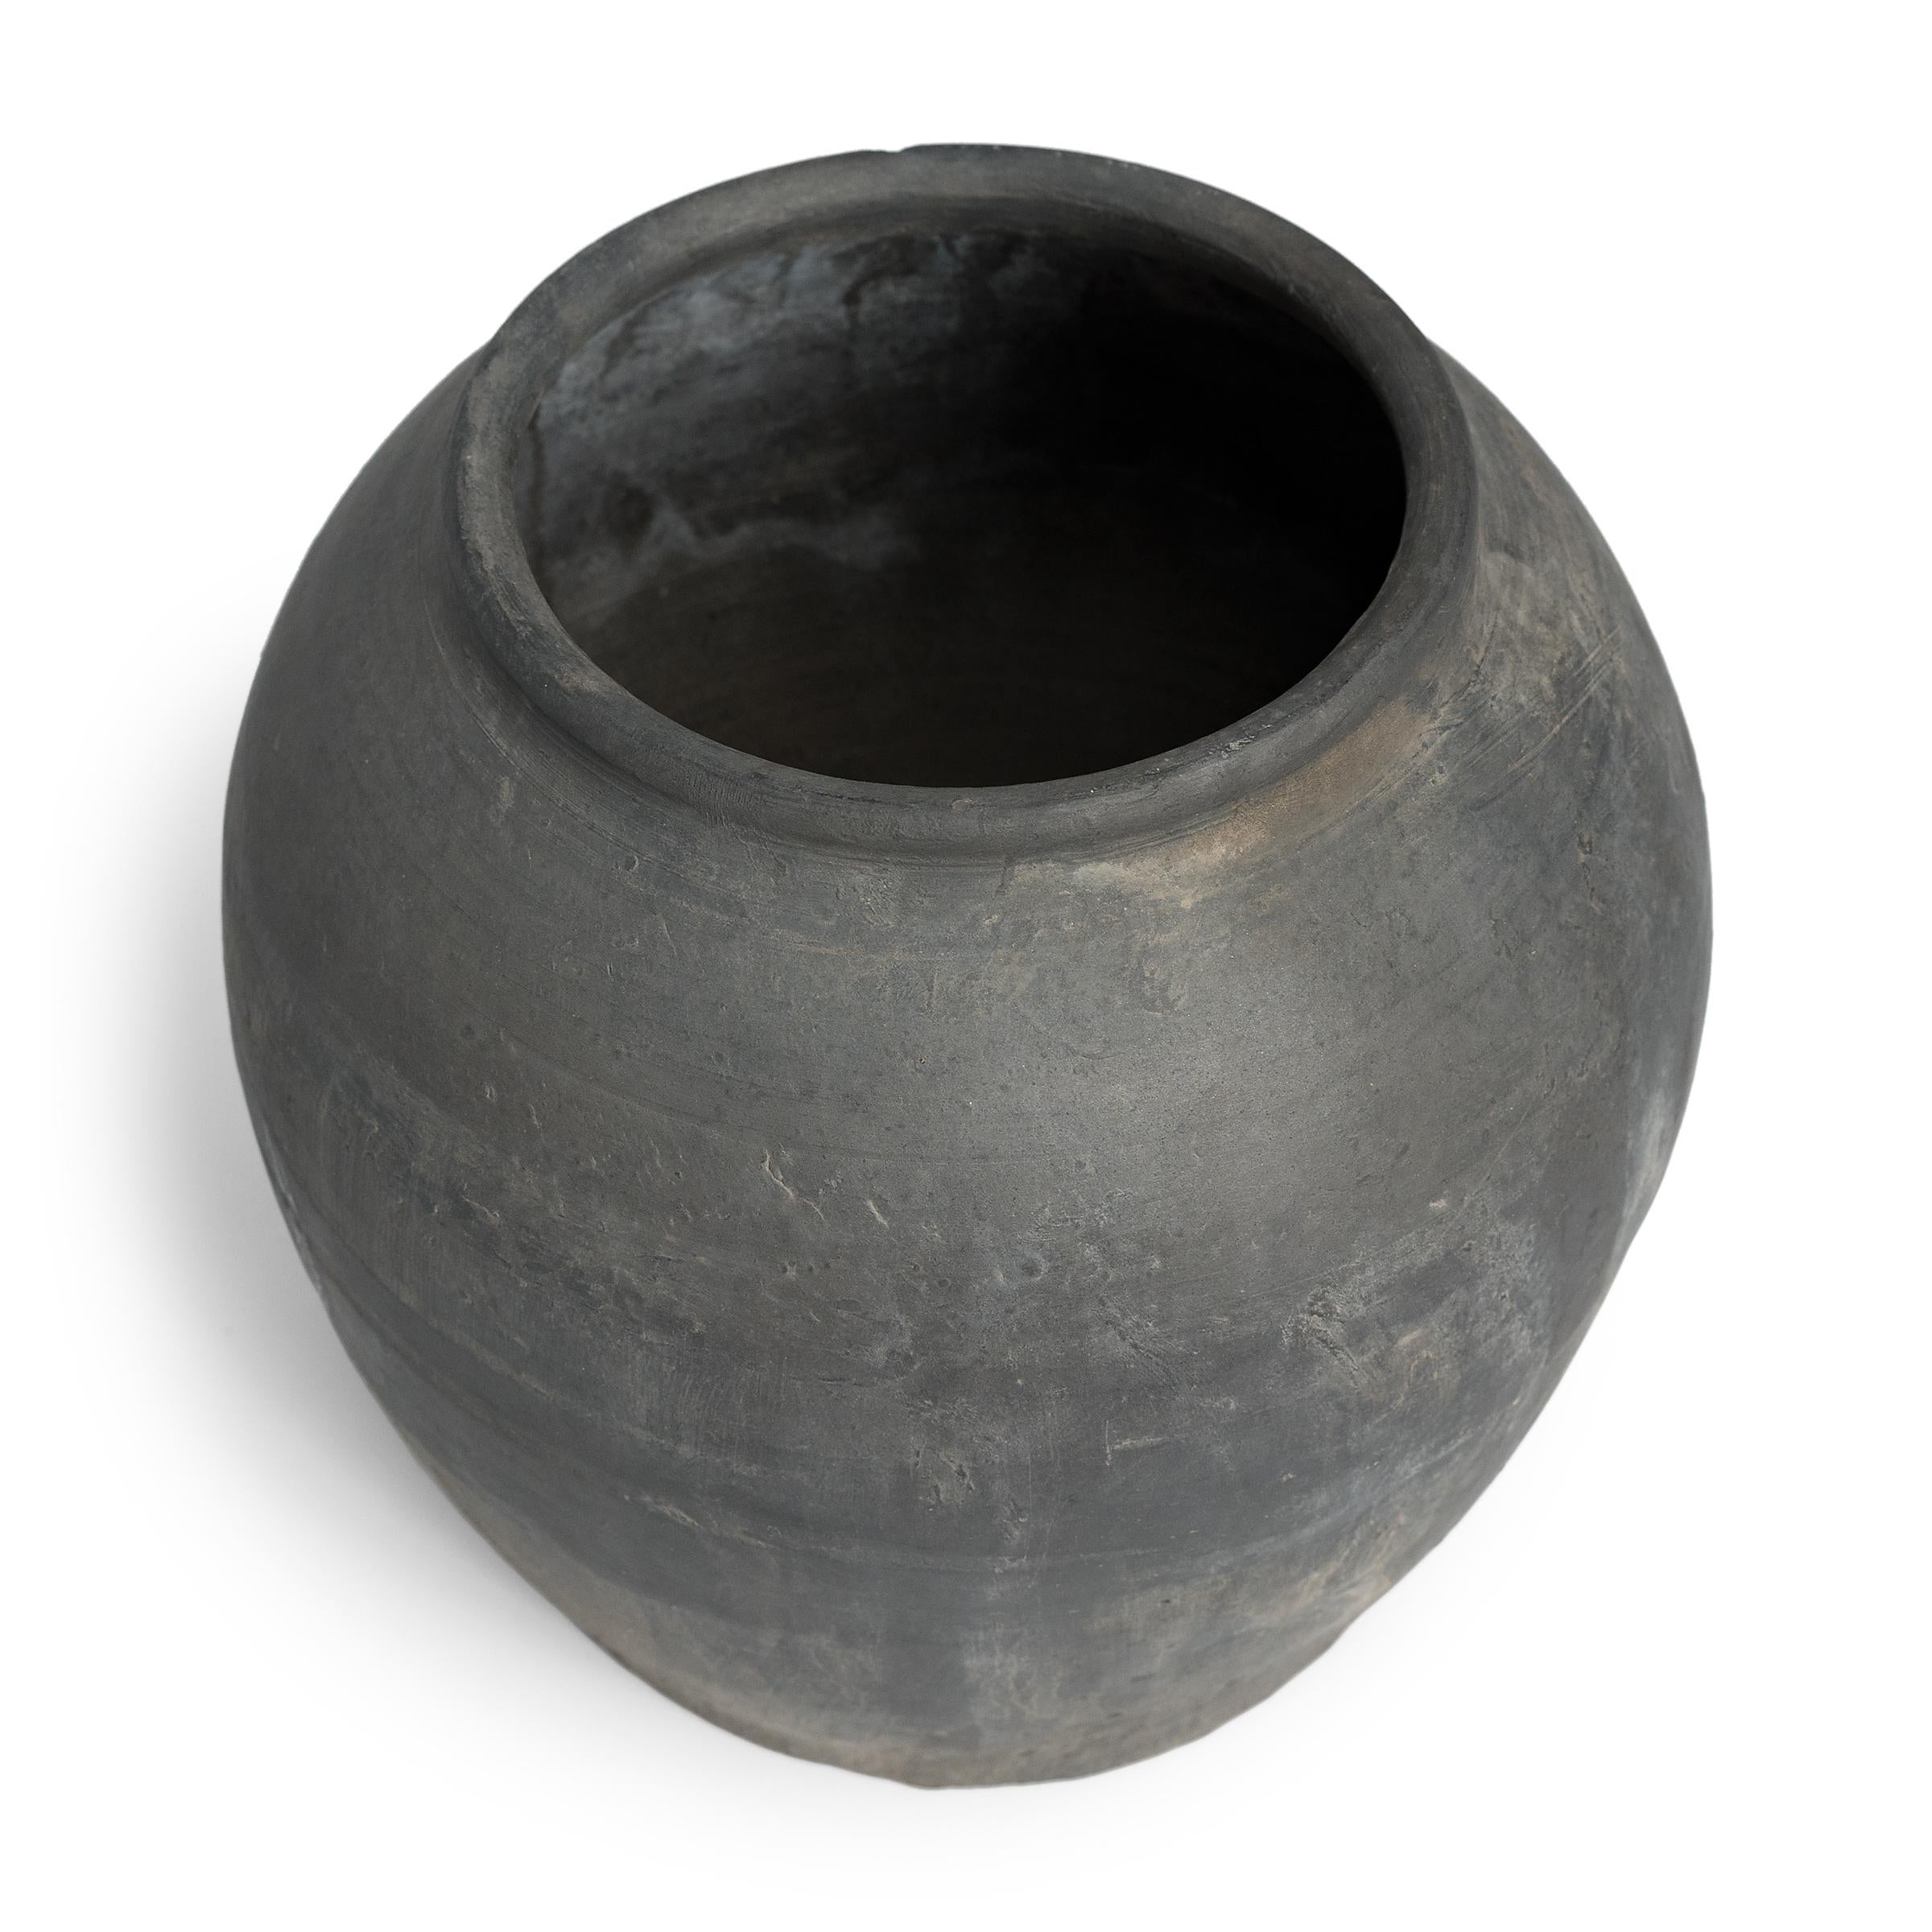 Chinese Export Black Chinese Clay Vessel, c. 1900